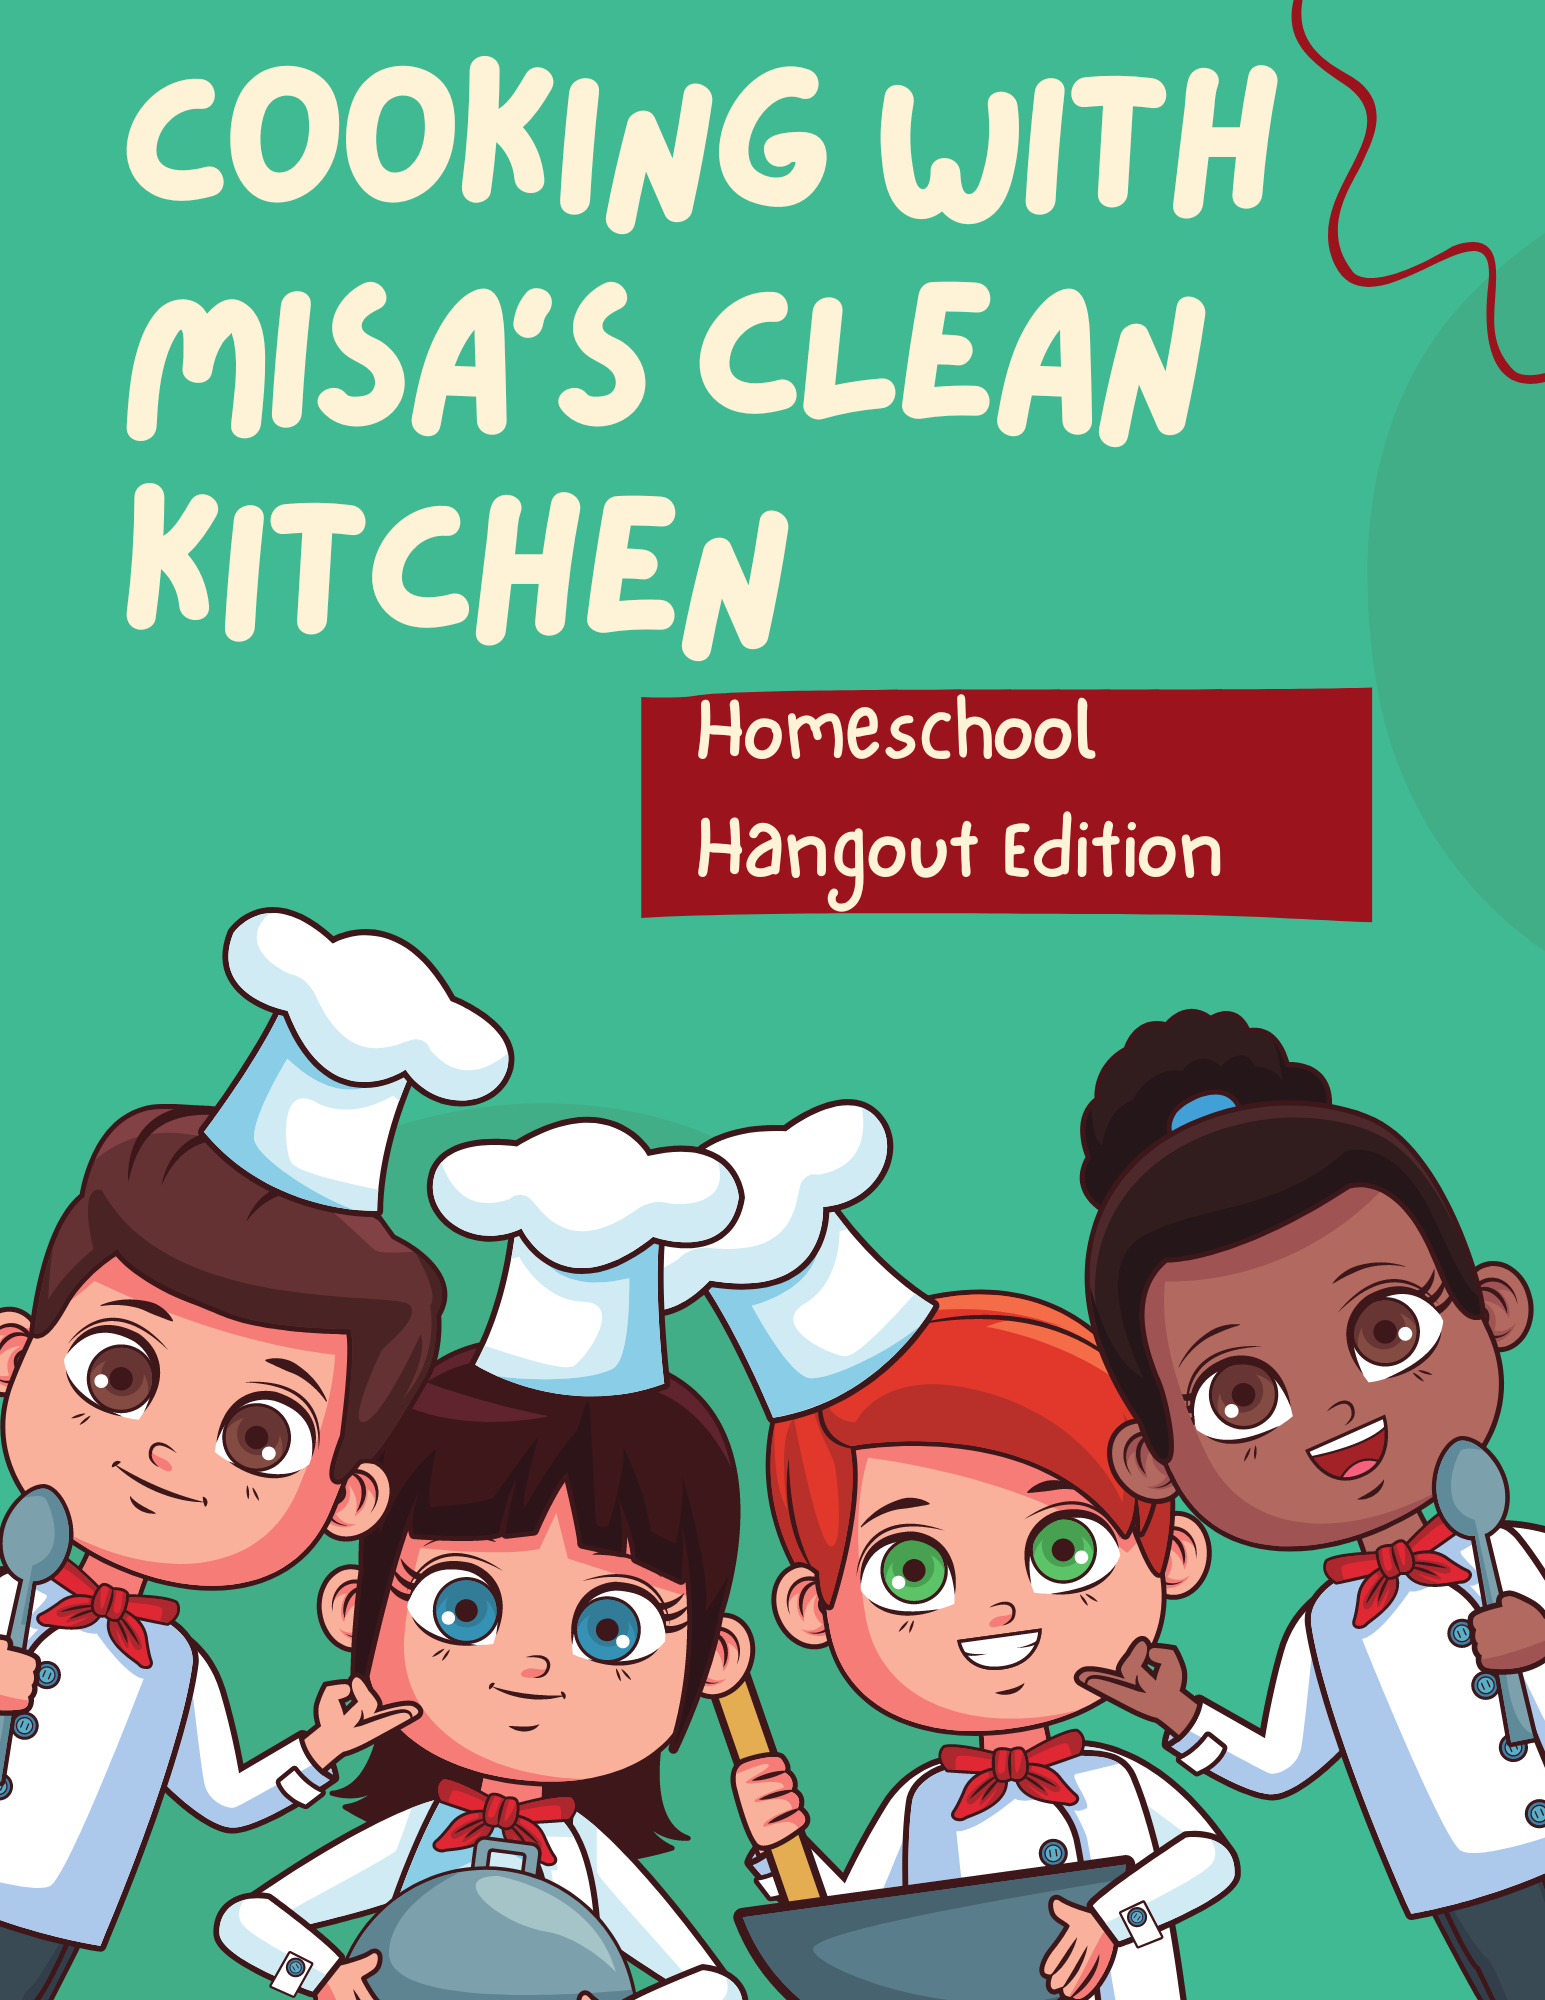 Cooking with Misa's Clean Kitchen with four cartoon kids dressed as chefs